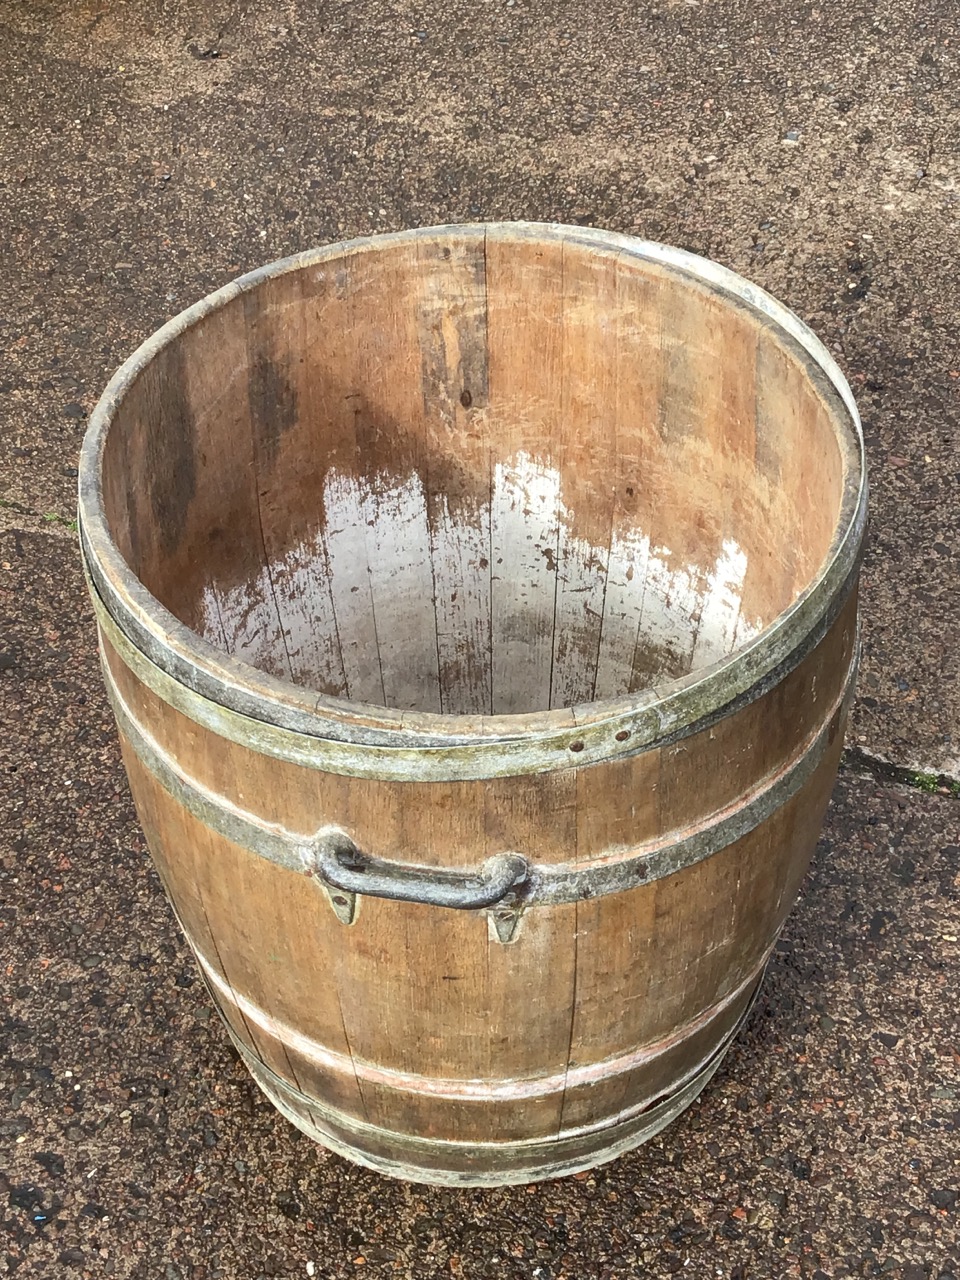 A coopered oak log barrel with iron hoops and carrying handles. (21in x 22in) - Image 3 of 3